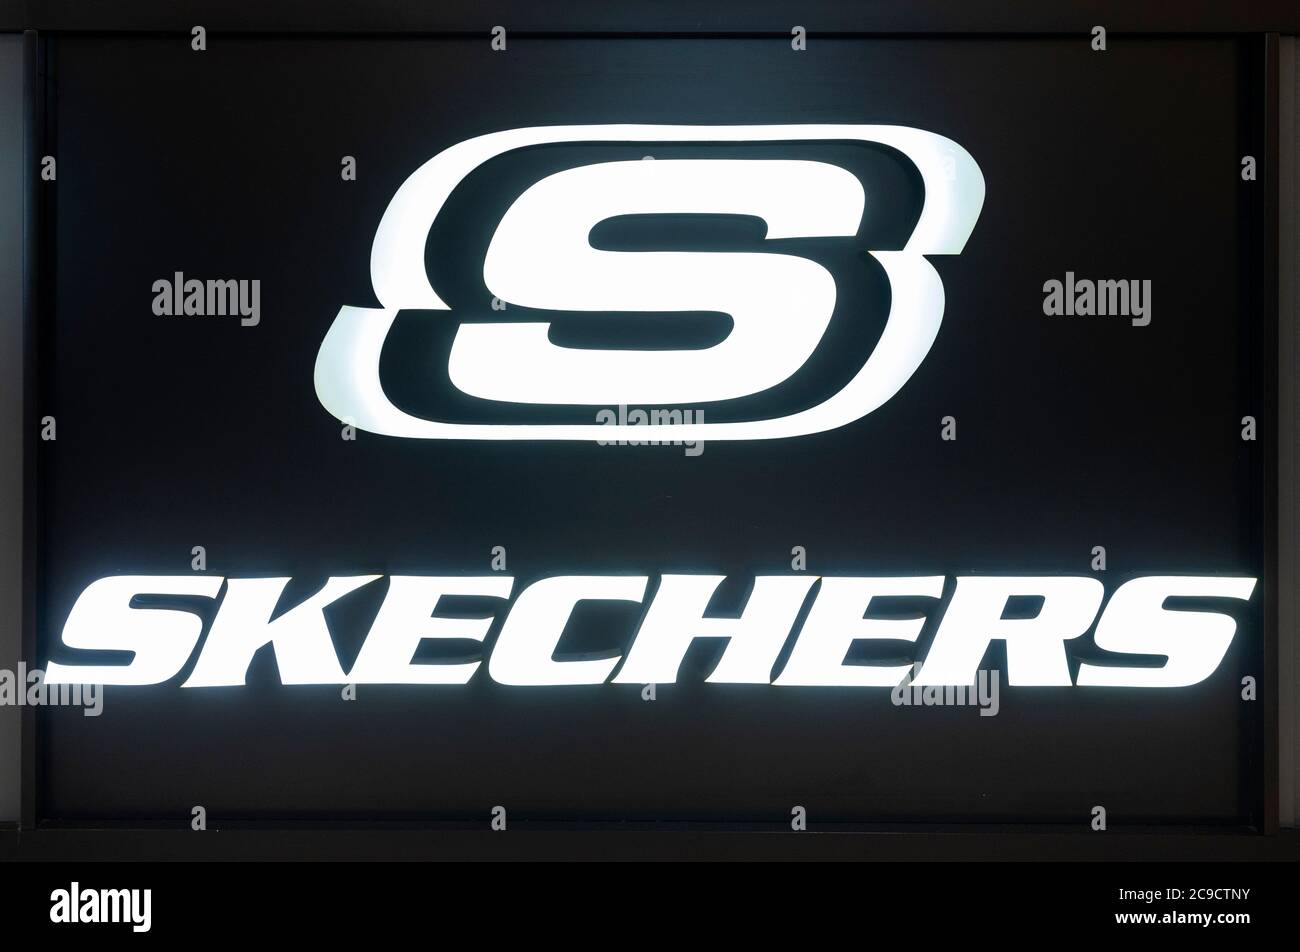 Skechers logo stock photography and images - Alamy